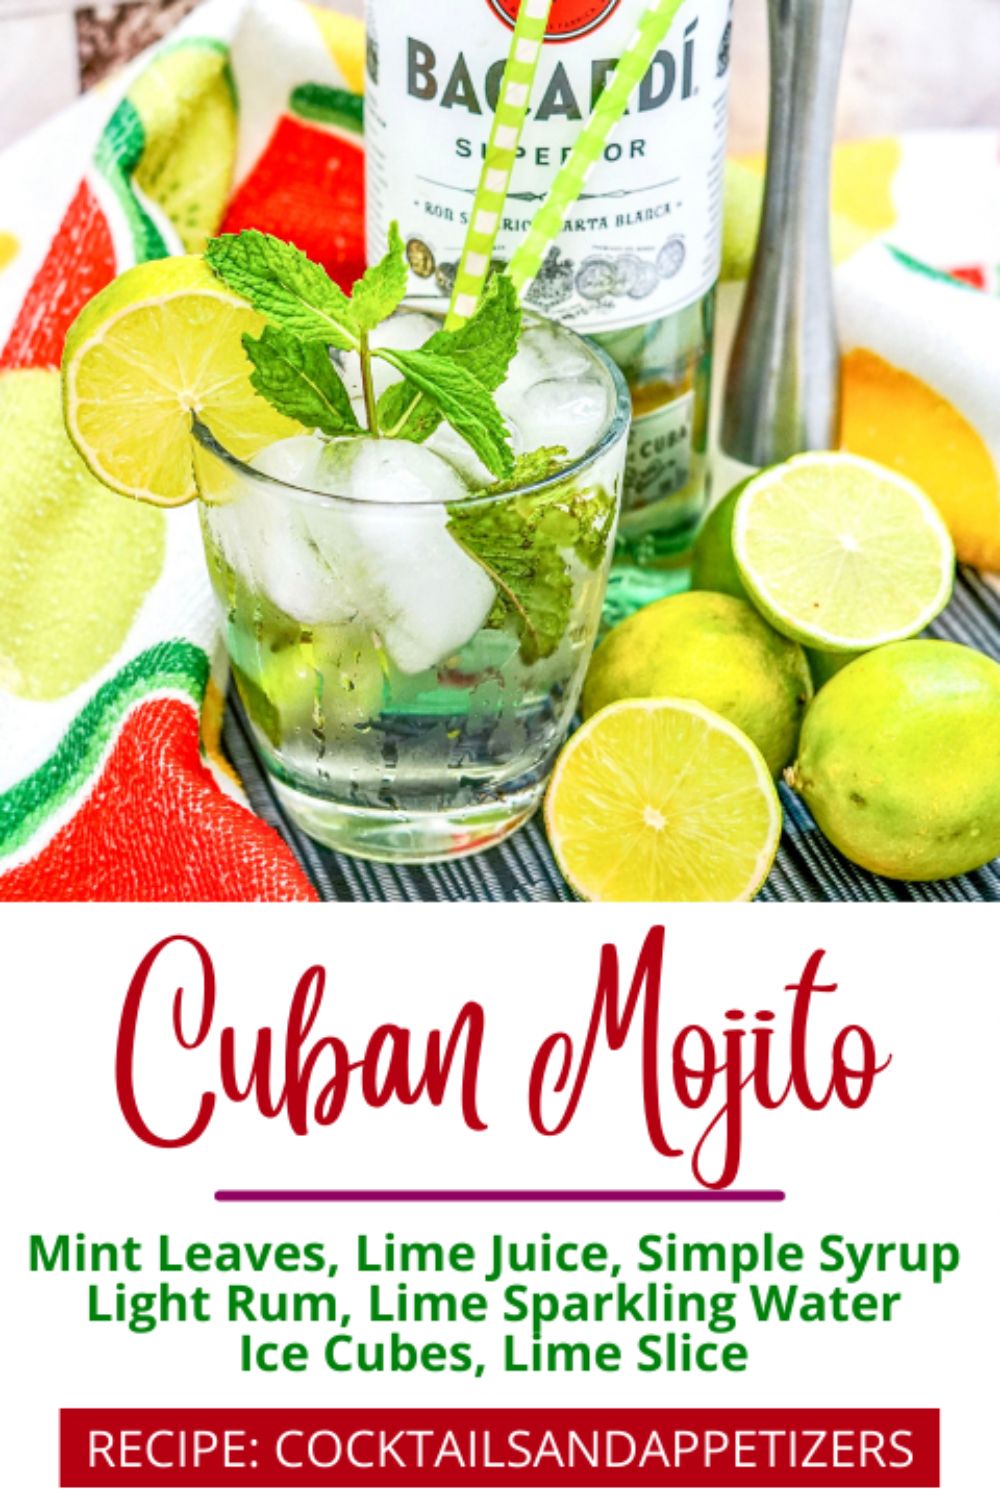 Cuban Mojito cocktail in a glass with lime garnish